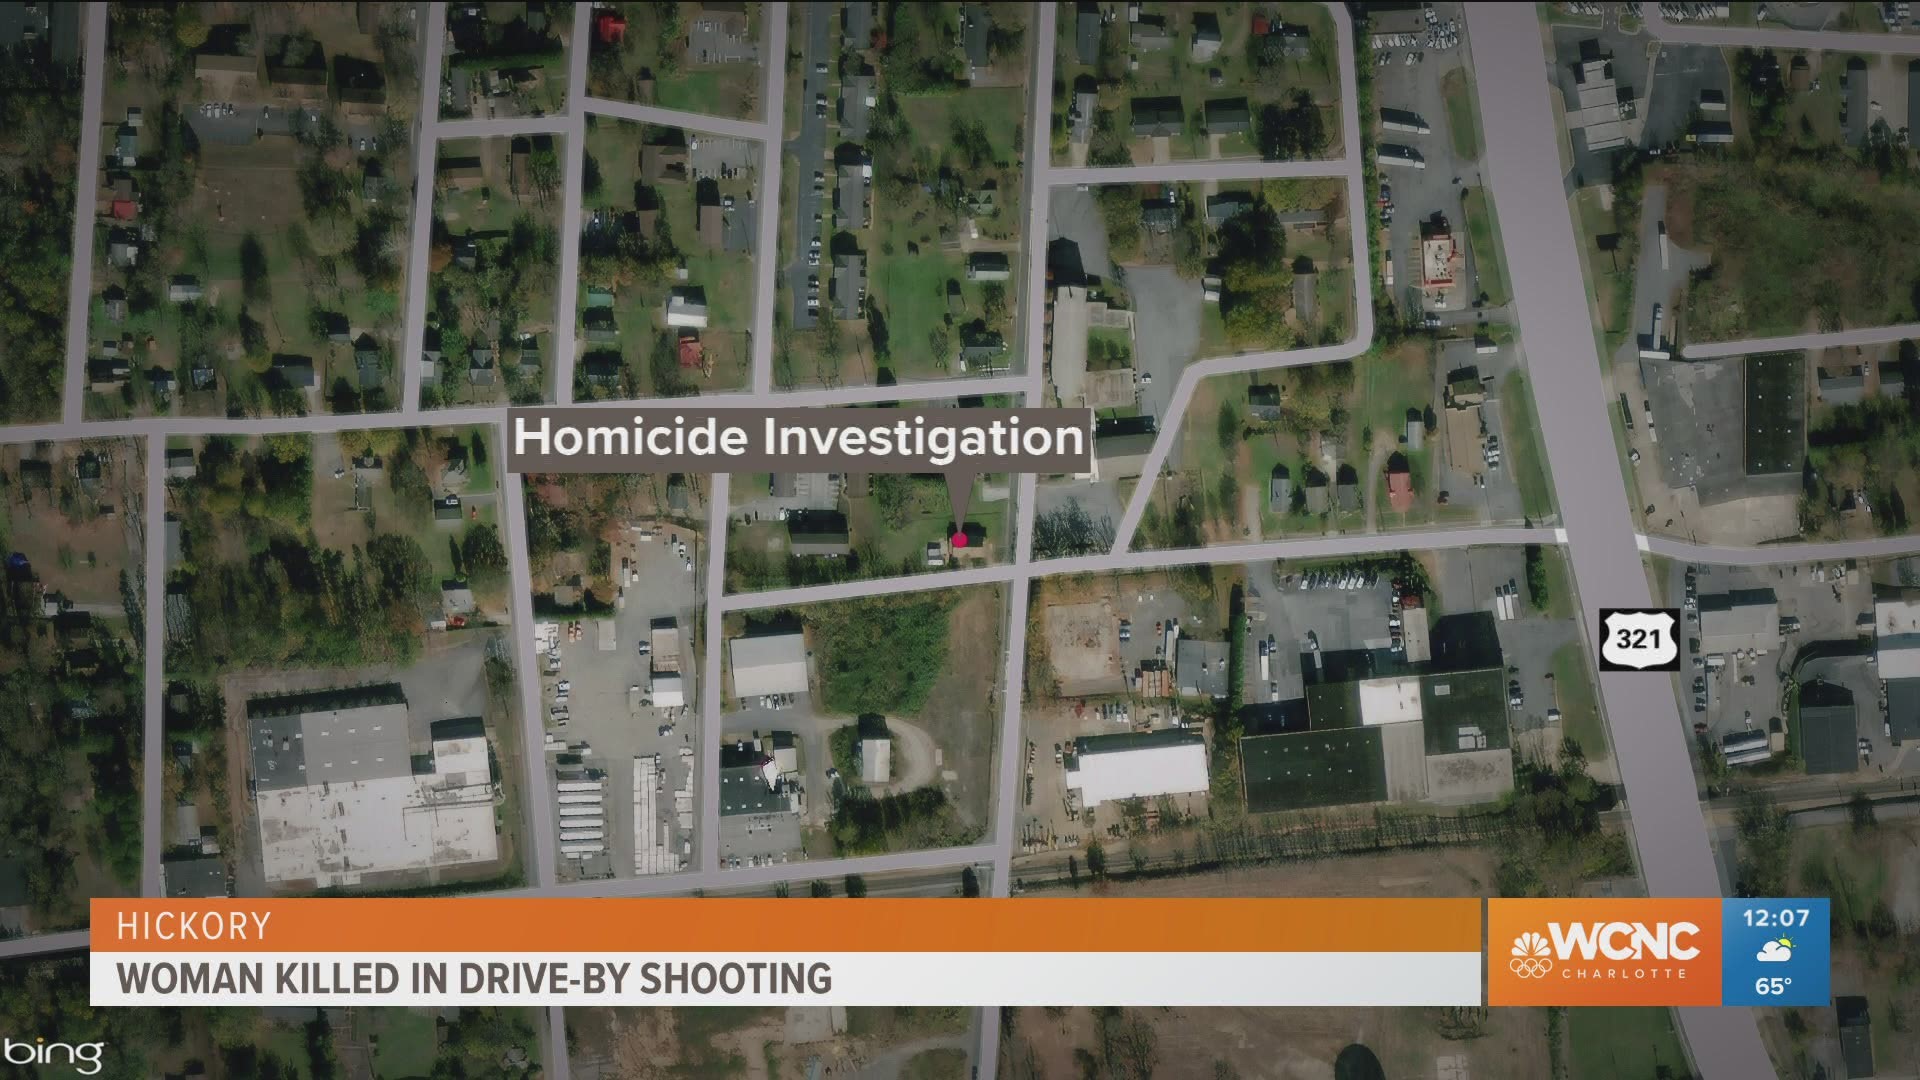 Police in Hickory, North Carolina, are investigating after a 27-year-old woman was killed in apparent drive-by shooting Wednesday night.